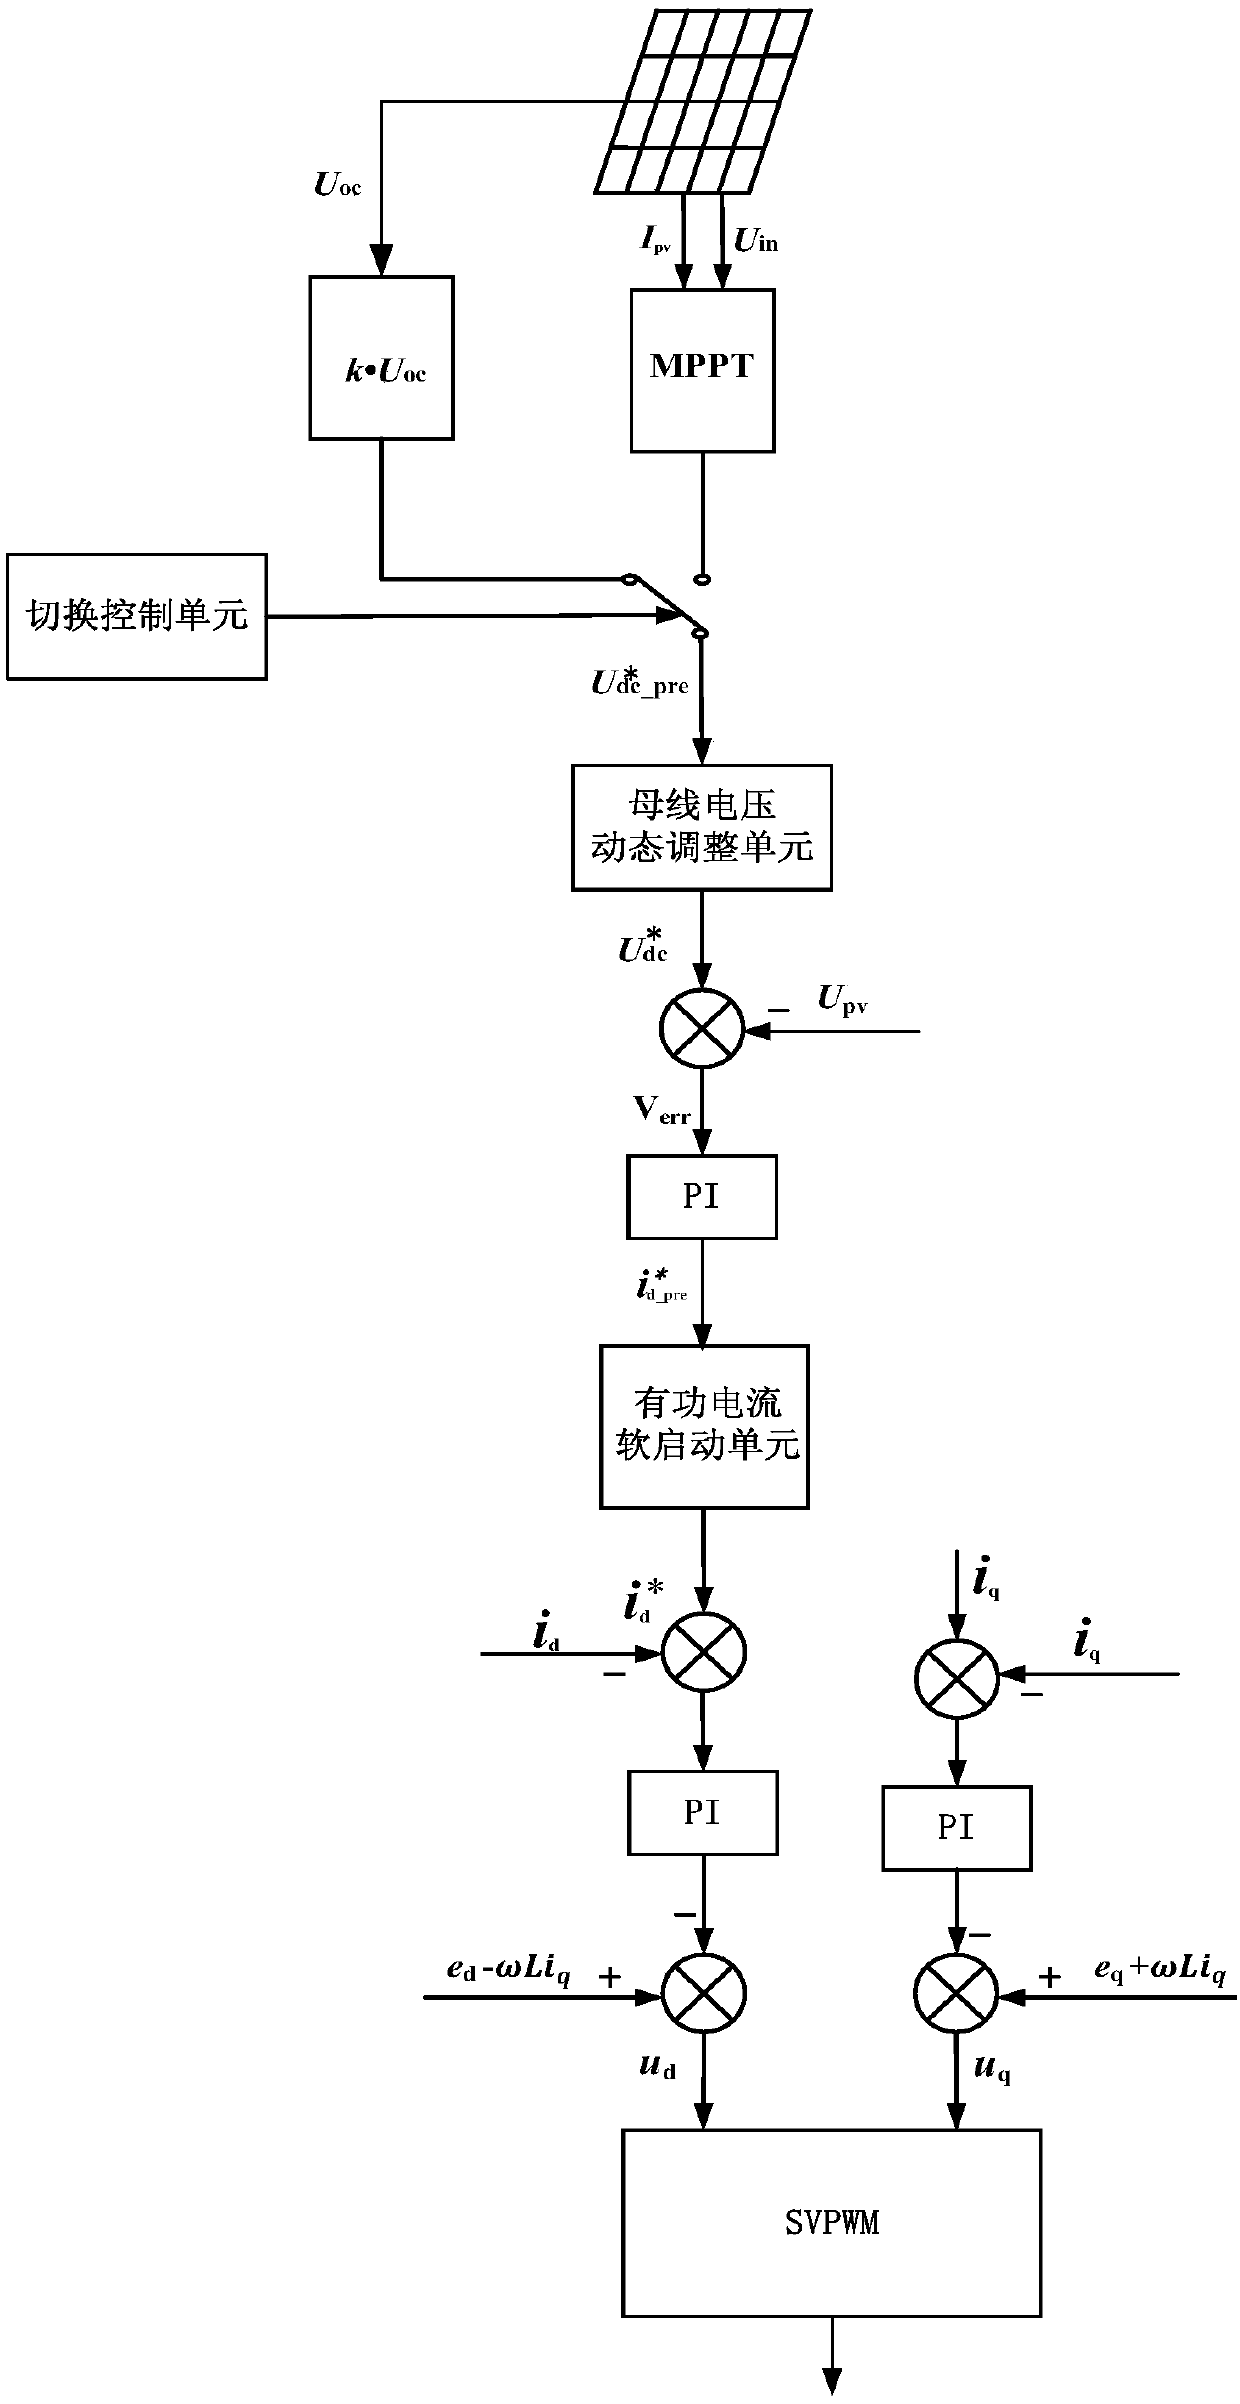 Grid-connected output power control method of photovoltaic power generation